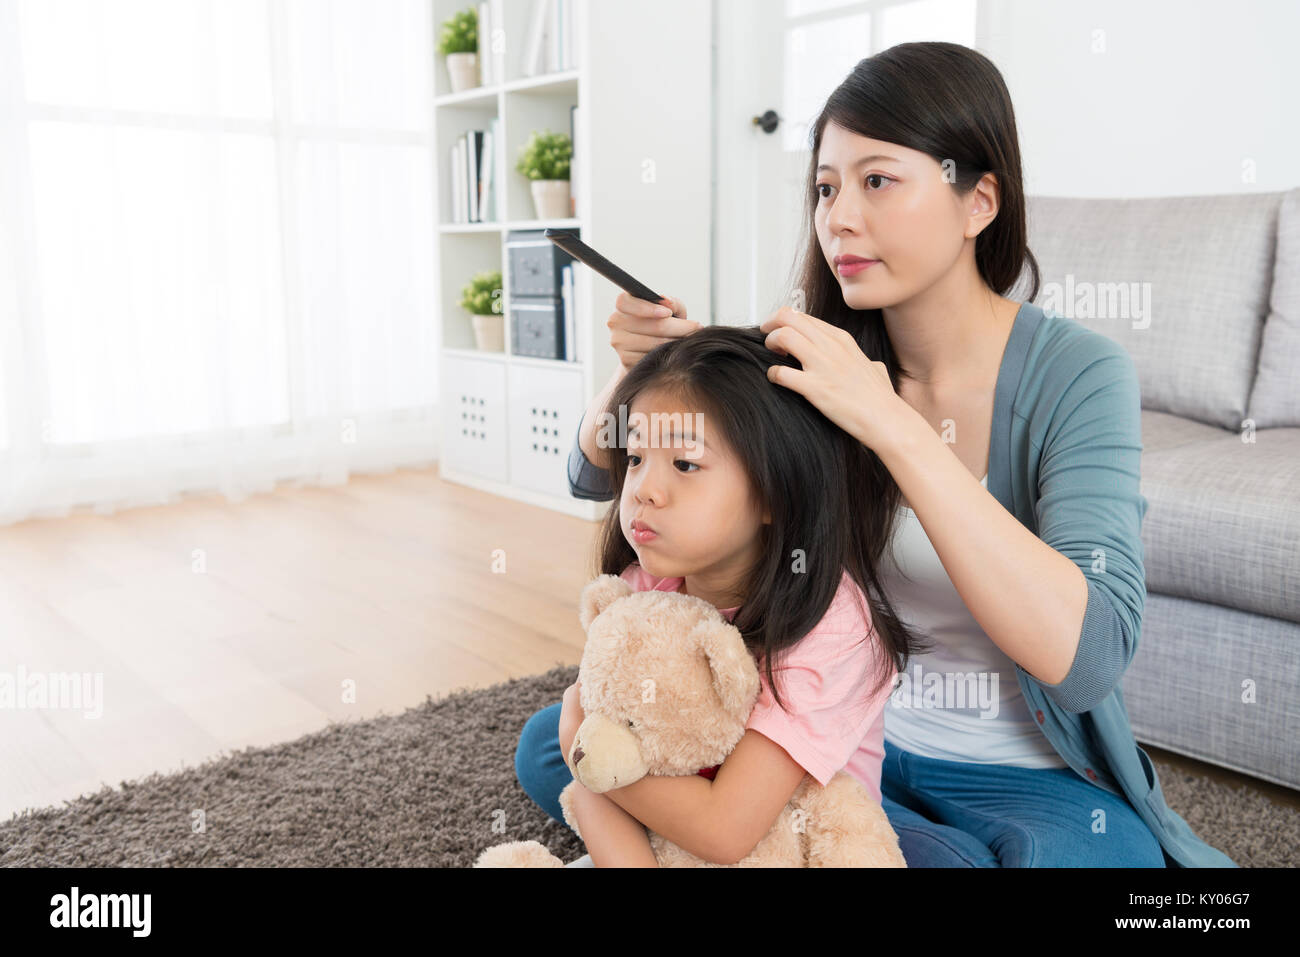 young cute little girl holding teddy toy sitting on floor in morning and face play grimace looking at mirror when mother combing her hair. Stock Photo